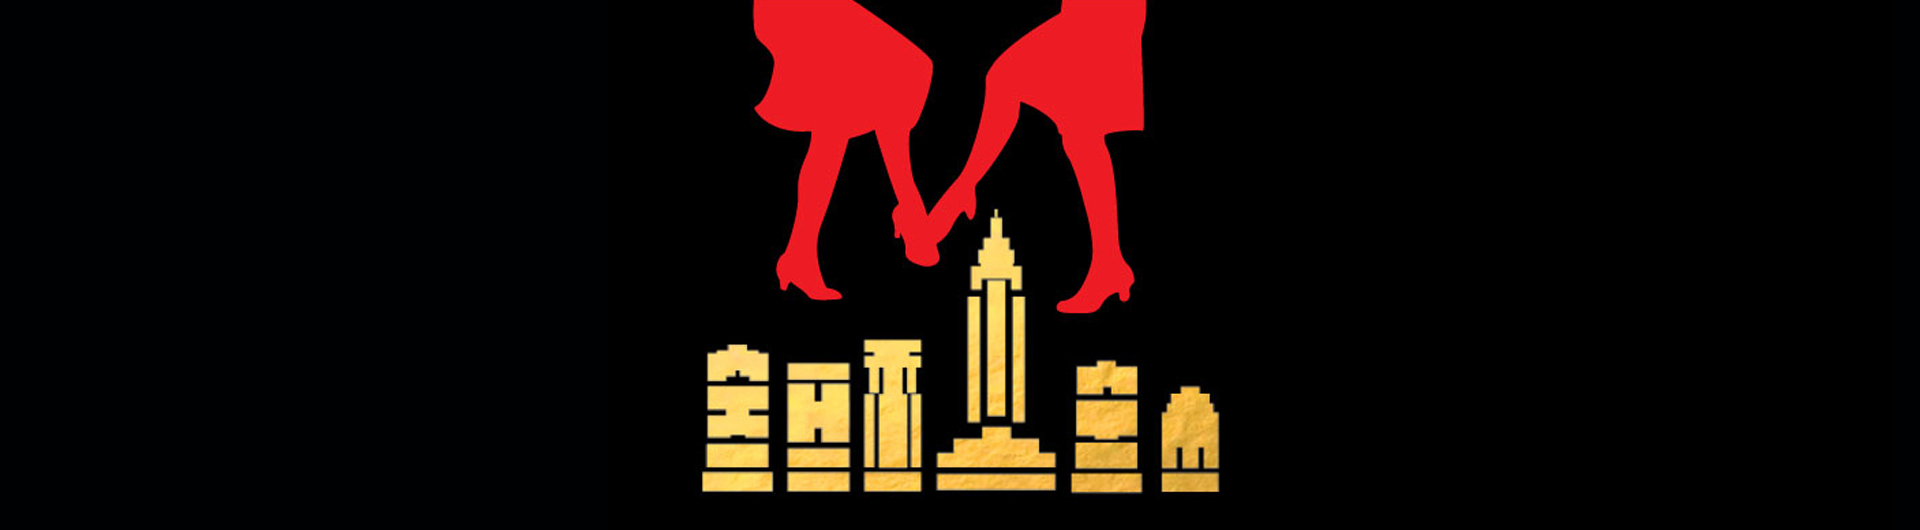 Thoroughly Modern Millie image of dancing feet over cityscape